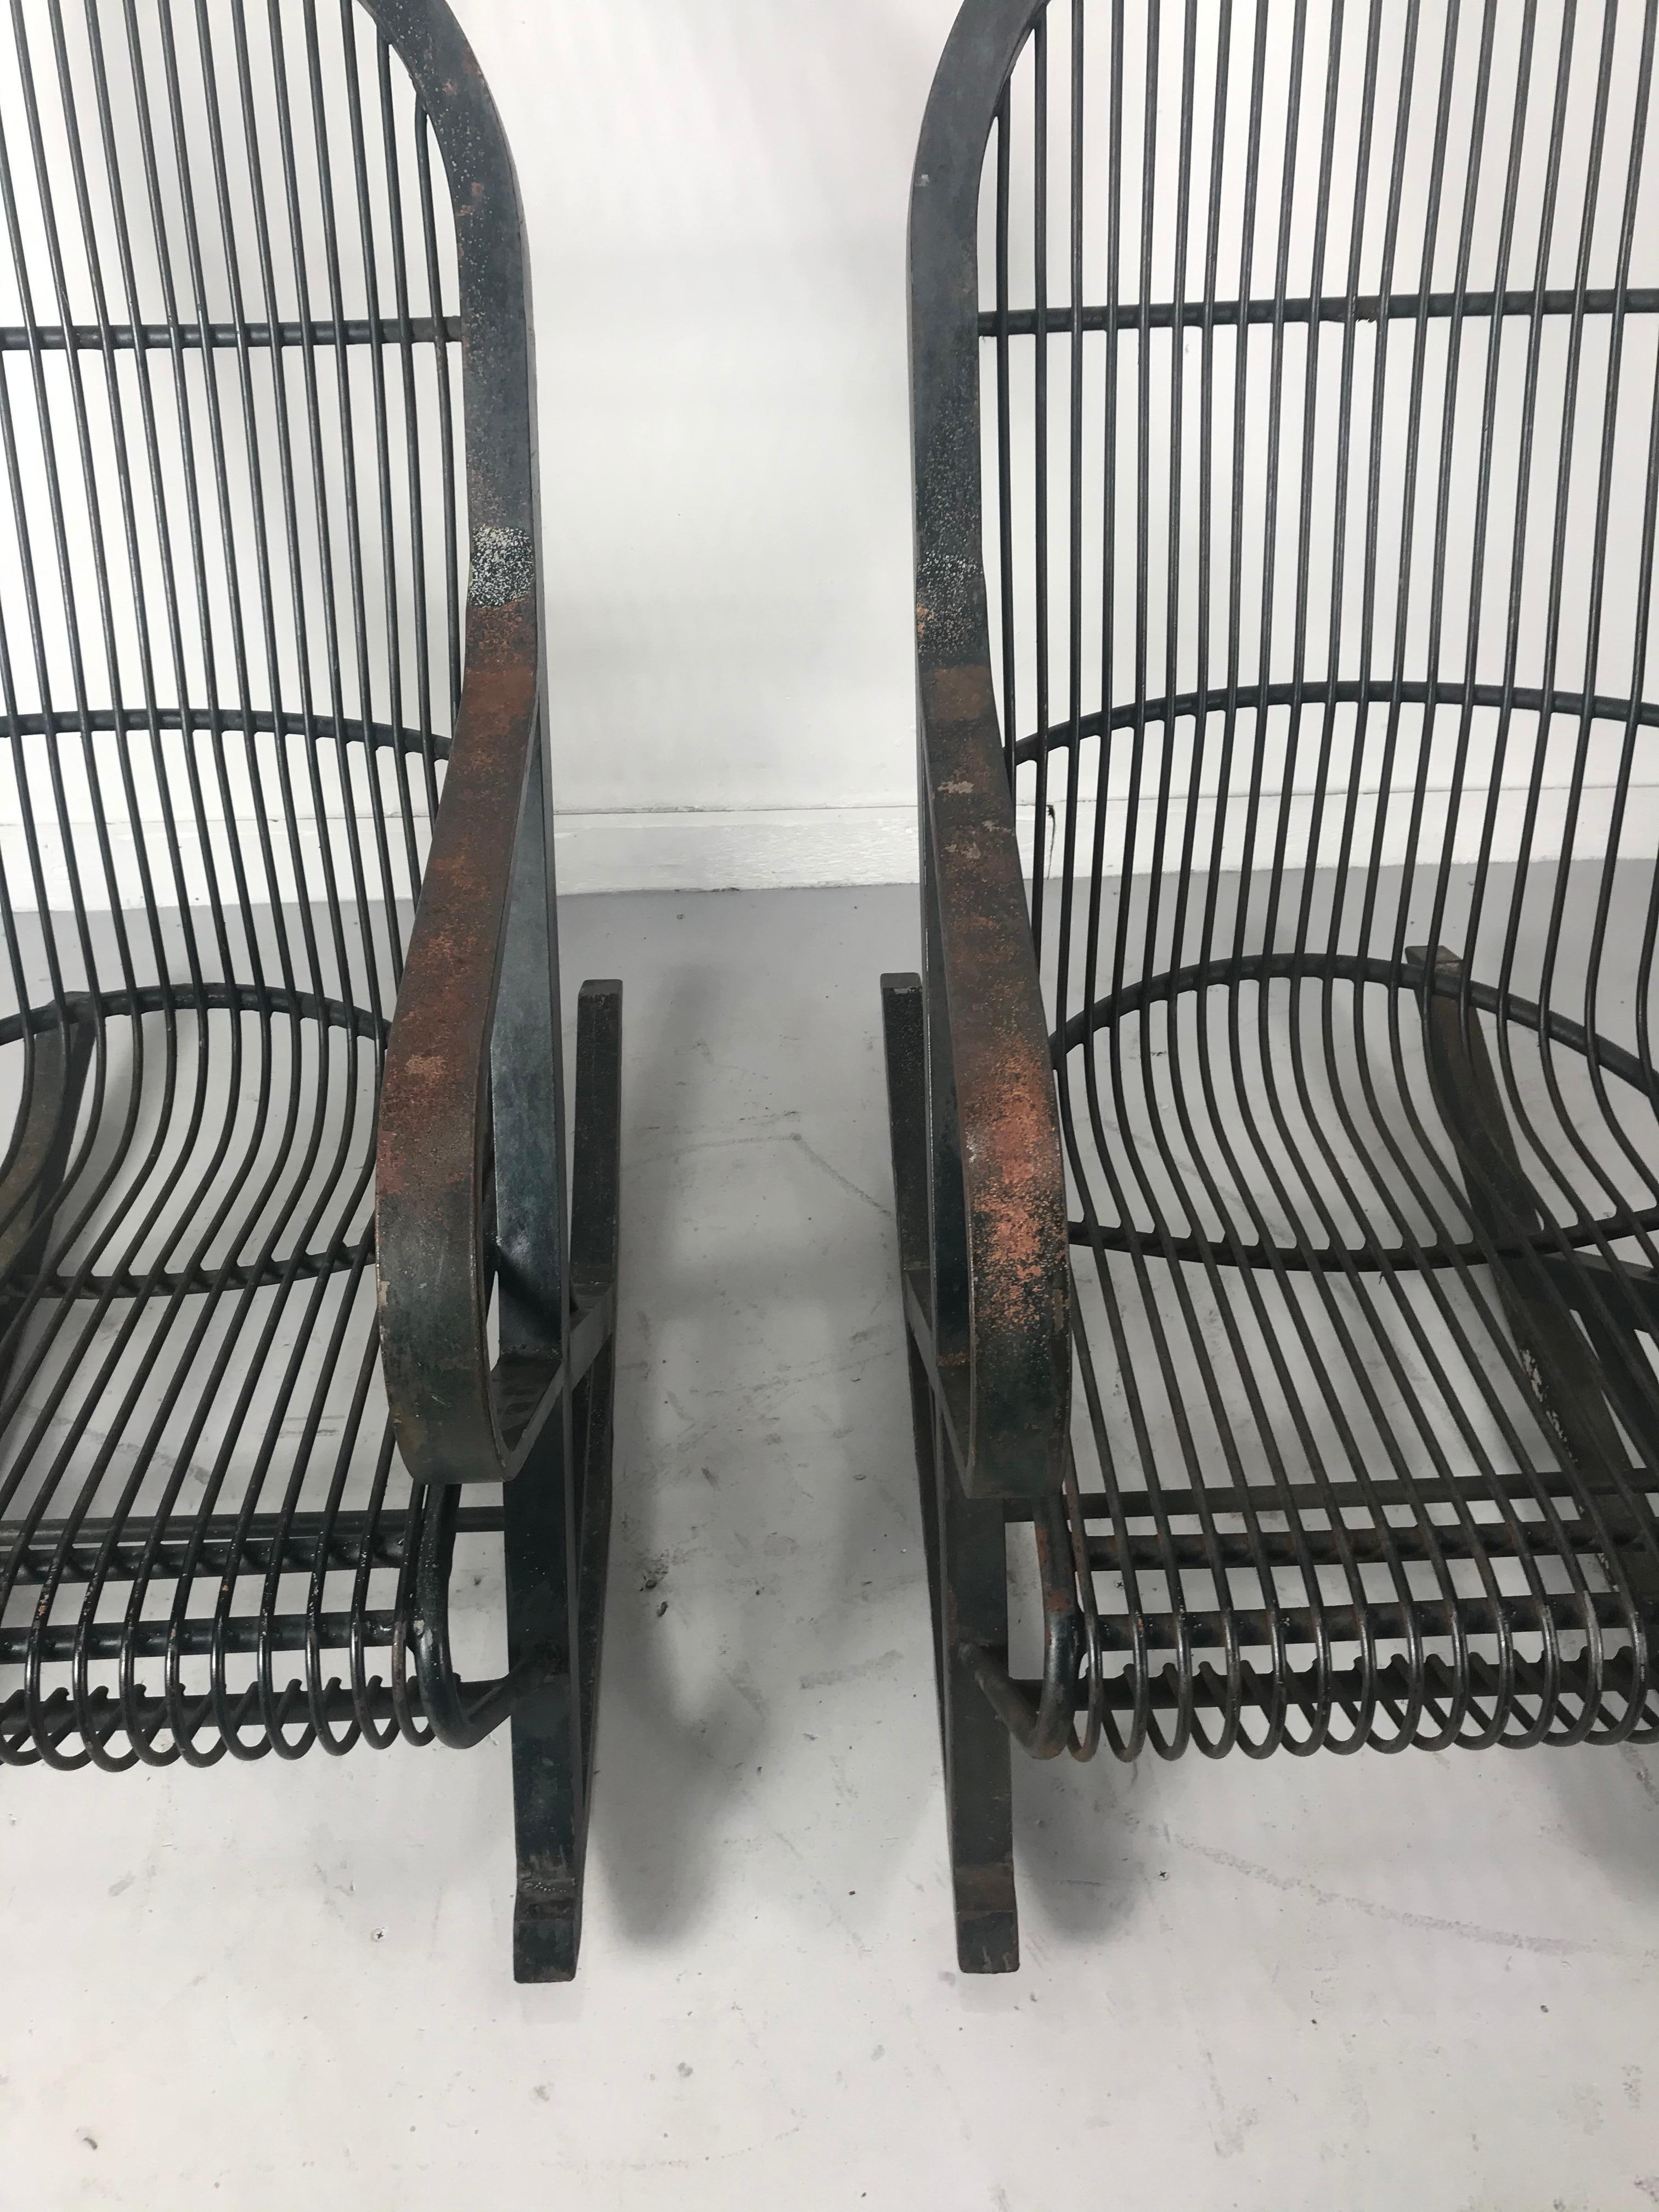 Amazing pair of all metal Industrial rocking chairs manufactured by the Trudo mfg co. Superior quality and construction. Everlasting comfort chair, chairs retain original metal label, Amazing original paint, finish, patina. Indoor or outdoor garden